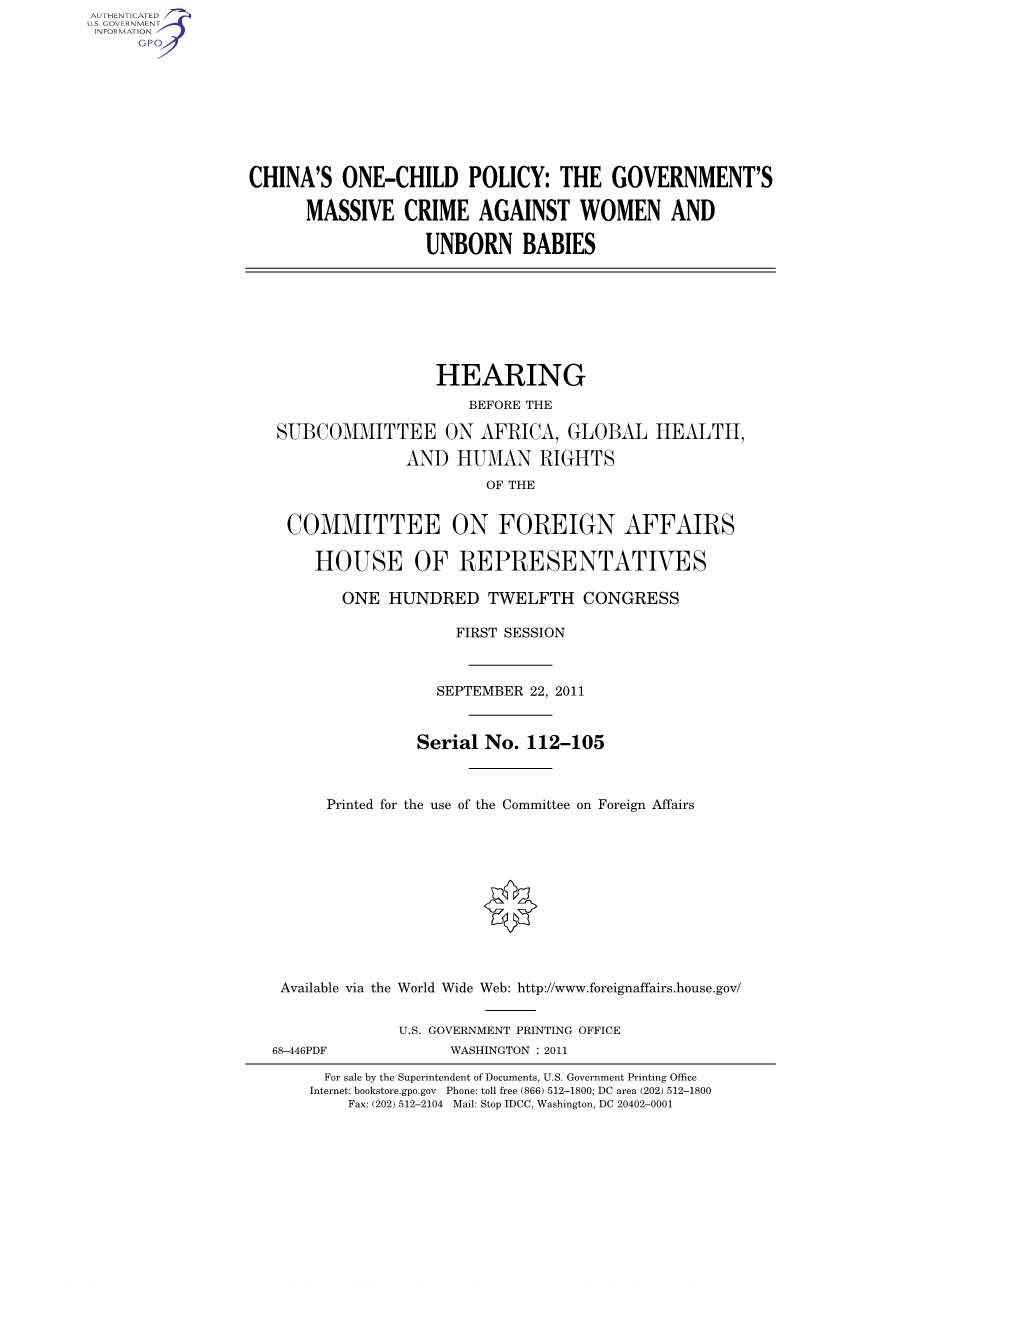 China's One–Child Policy: the Government's Massive Crime Against Women and Unborn Babies Hearing Committee on Foreign Affa